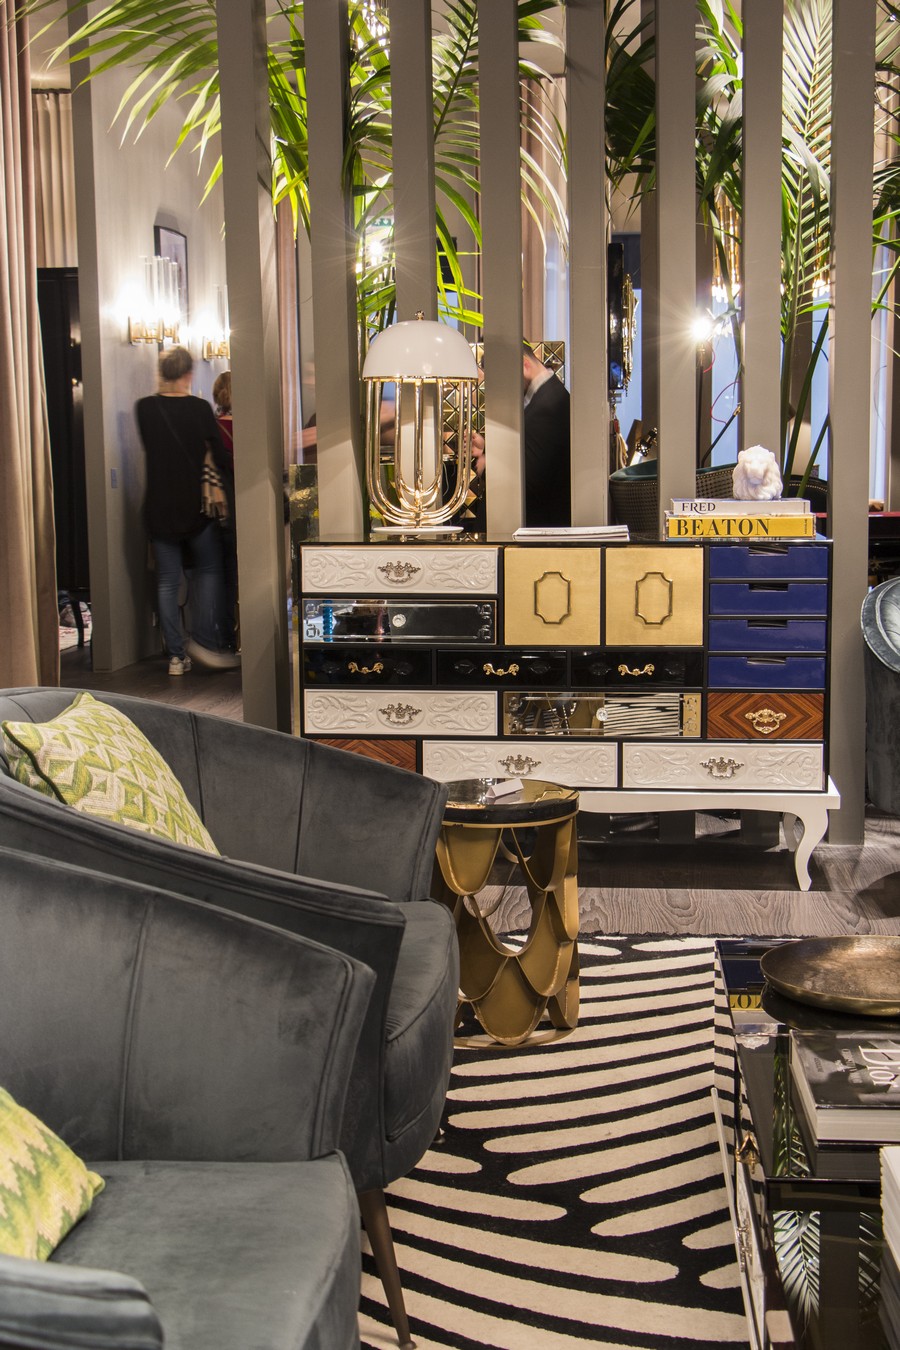 7 Reasons Why You Must Visit Covet House at Maison Et Objet | Covet House stand is an inspiring place where you can enjoy a true design experience with our specialized team of product specialists and walk through beautiful high-end design creations. #ParisDesignWeek #MO18 #MaisonetObjet #interiordesignideas #luxurybrands